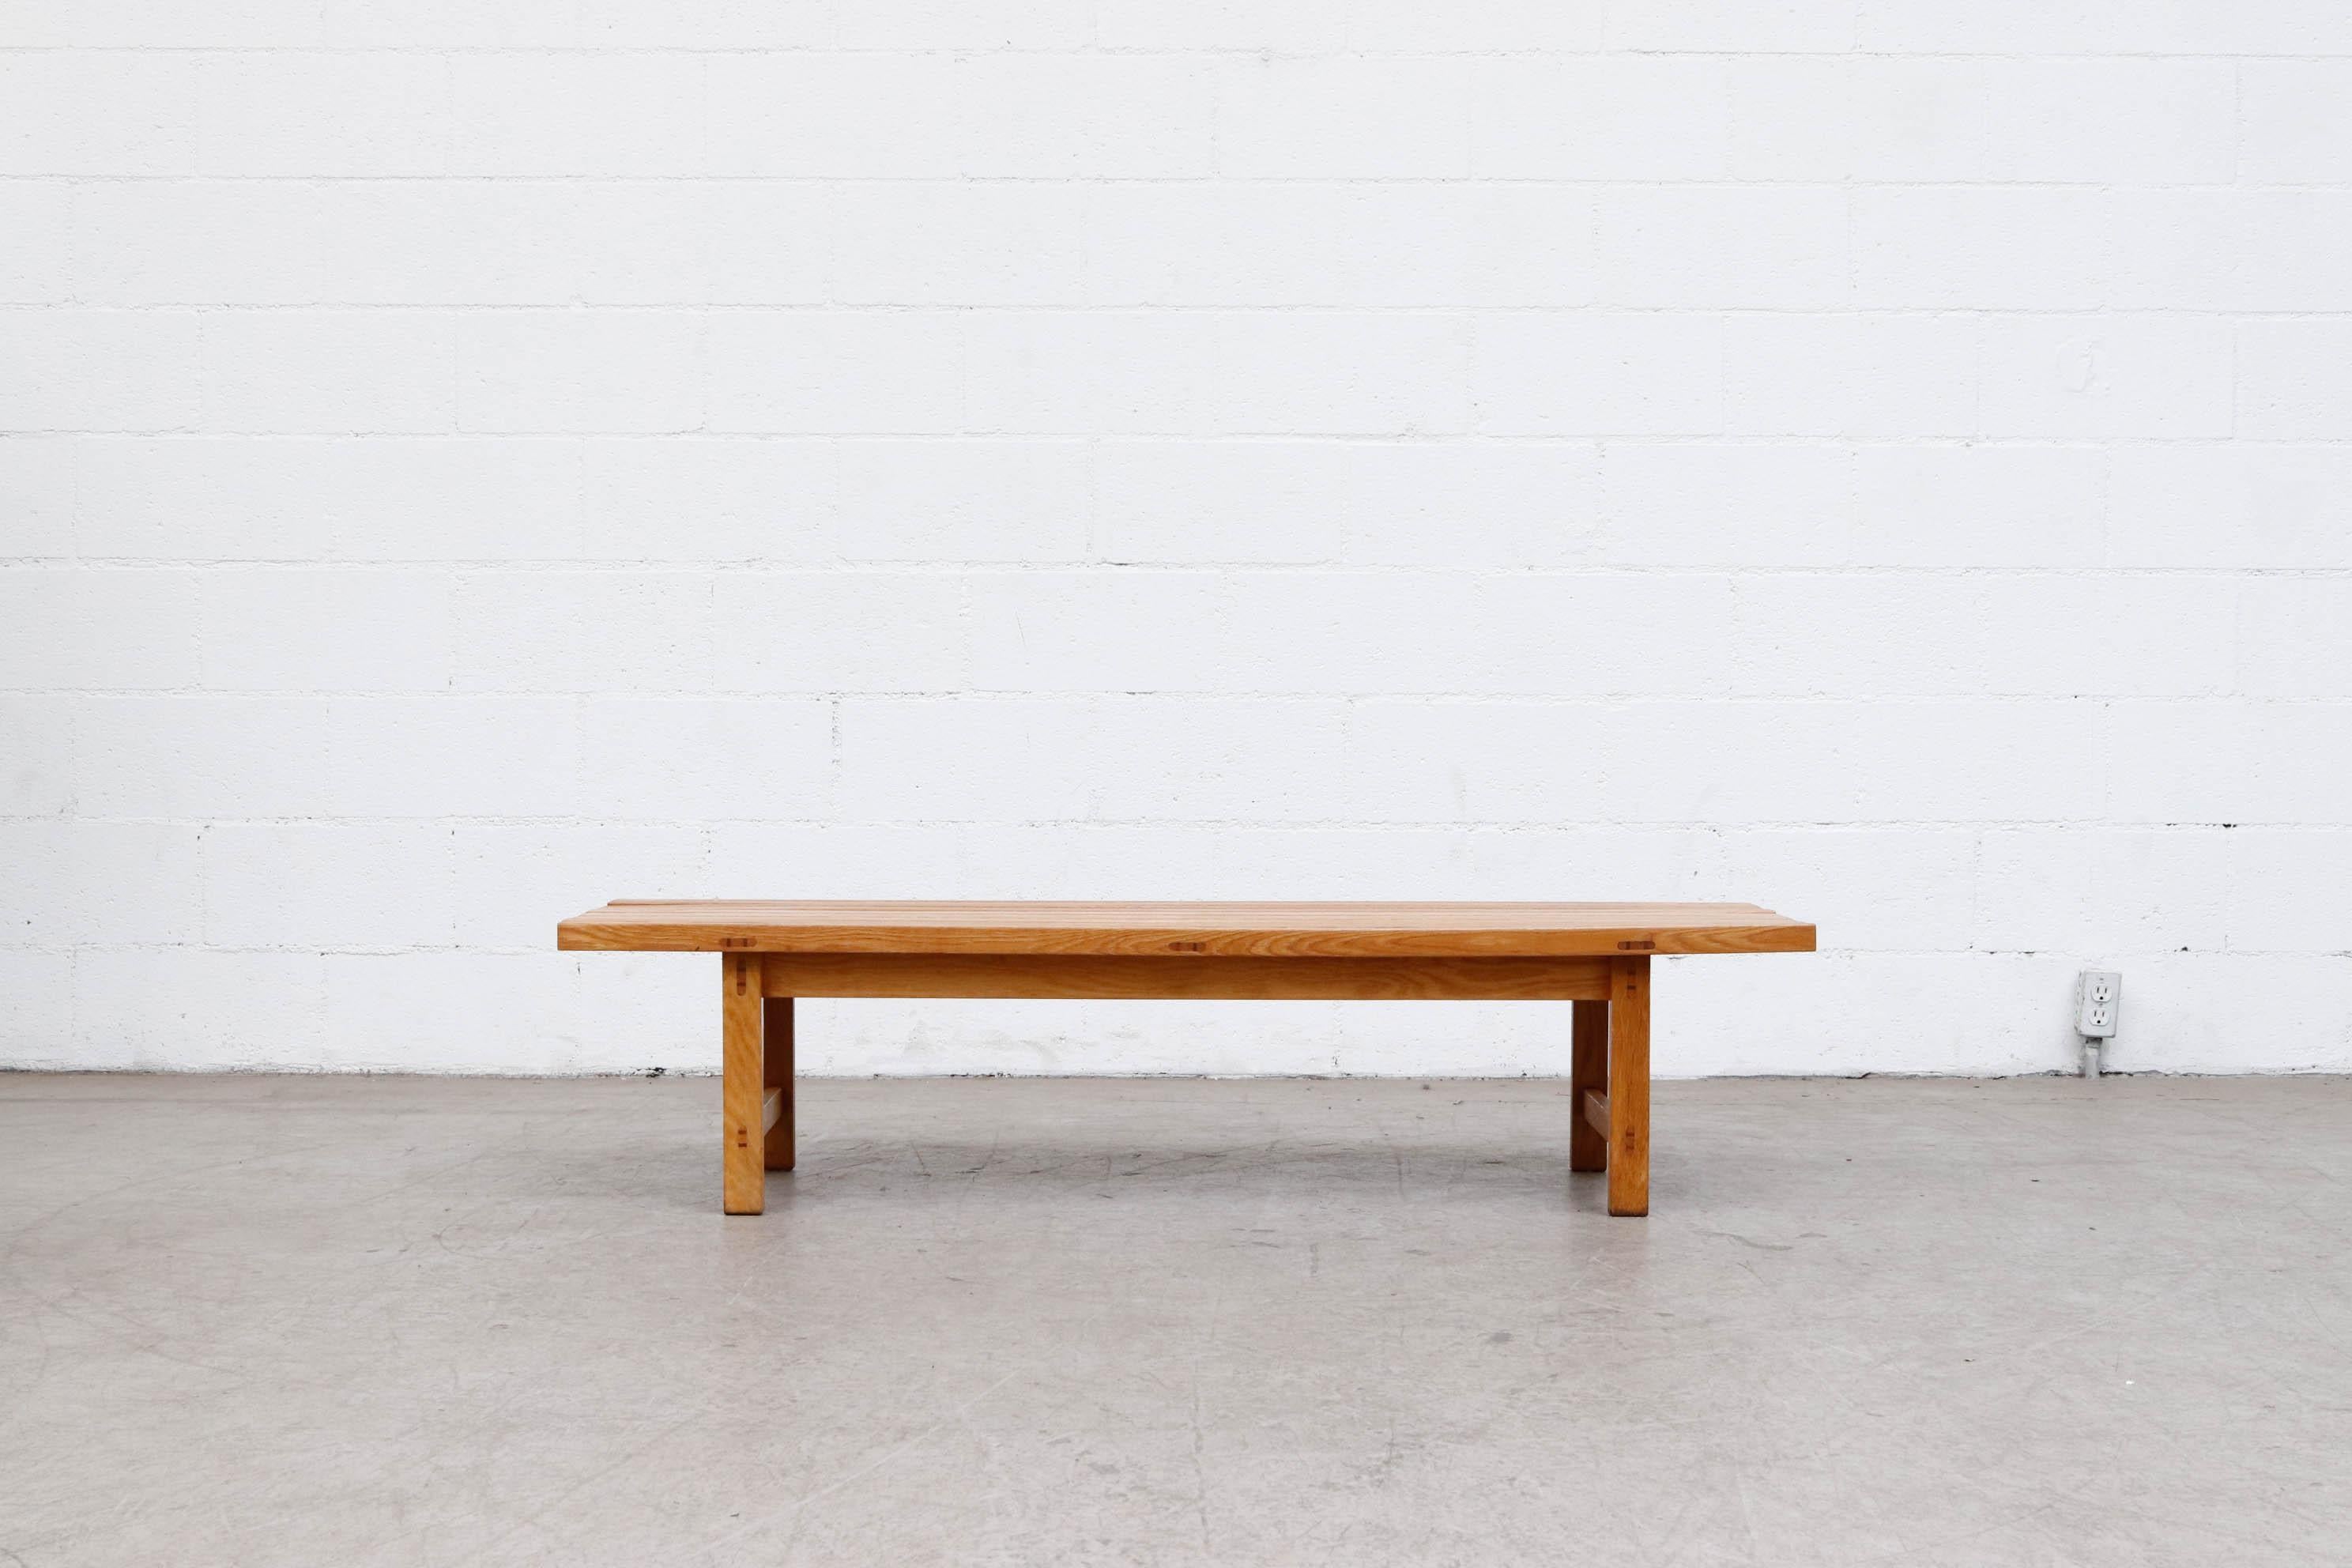 Midcentury Hugo Svensson oak slat bench for Bjärnums Möbelfabriker AB. Beautiful construction. Both in good original condition with wear consistent with their age and use.